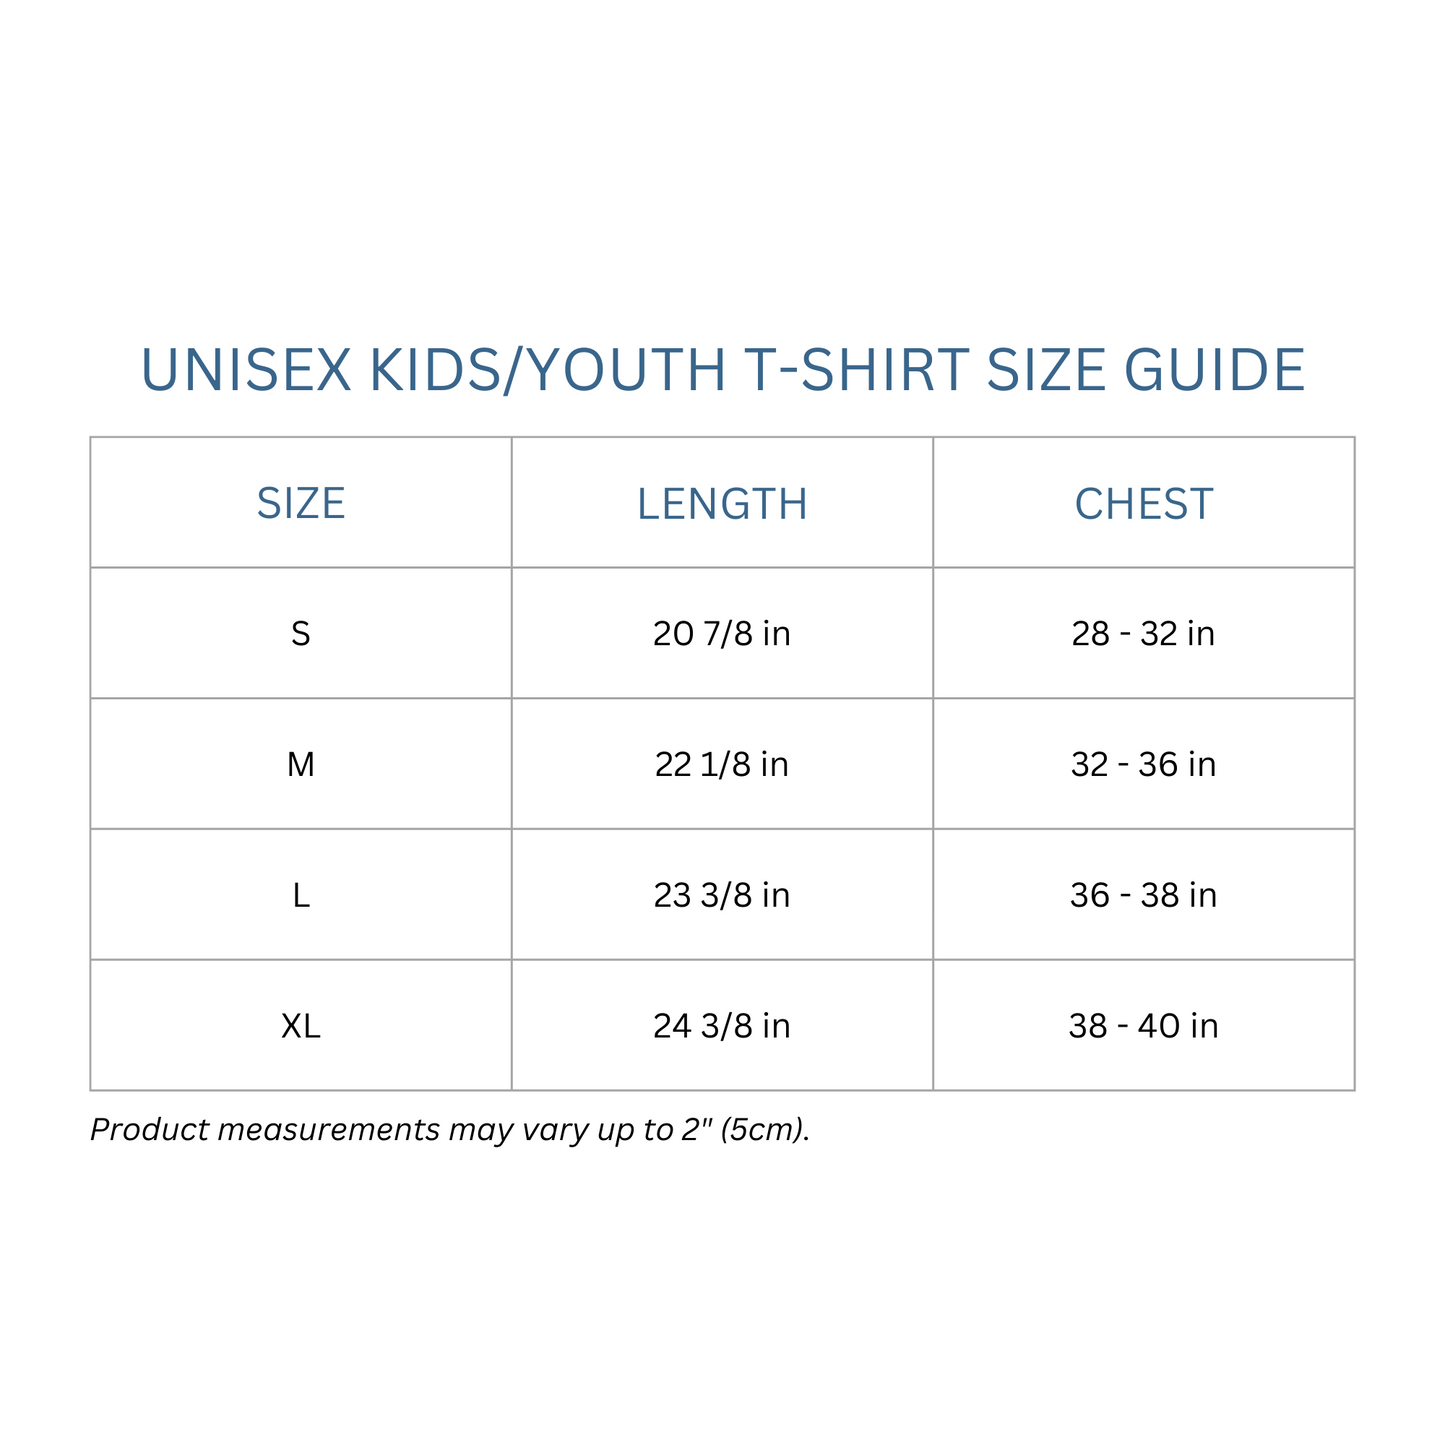 Totes Manila Co size guide for unisex kids/youth shirts